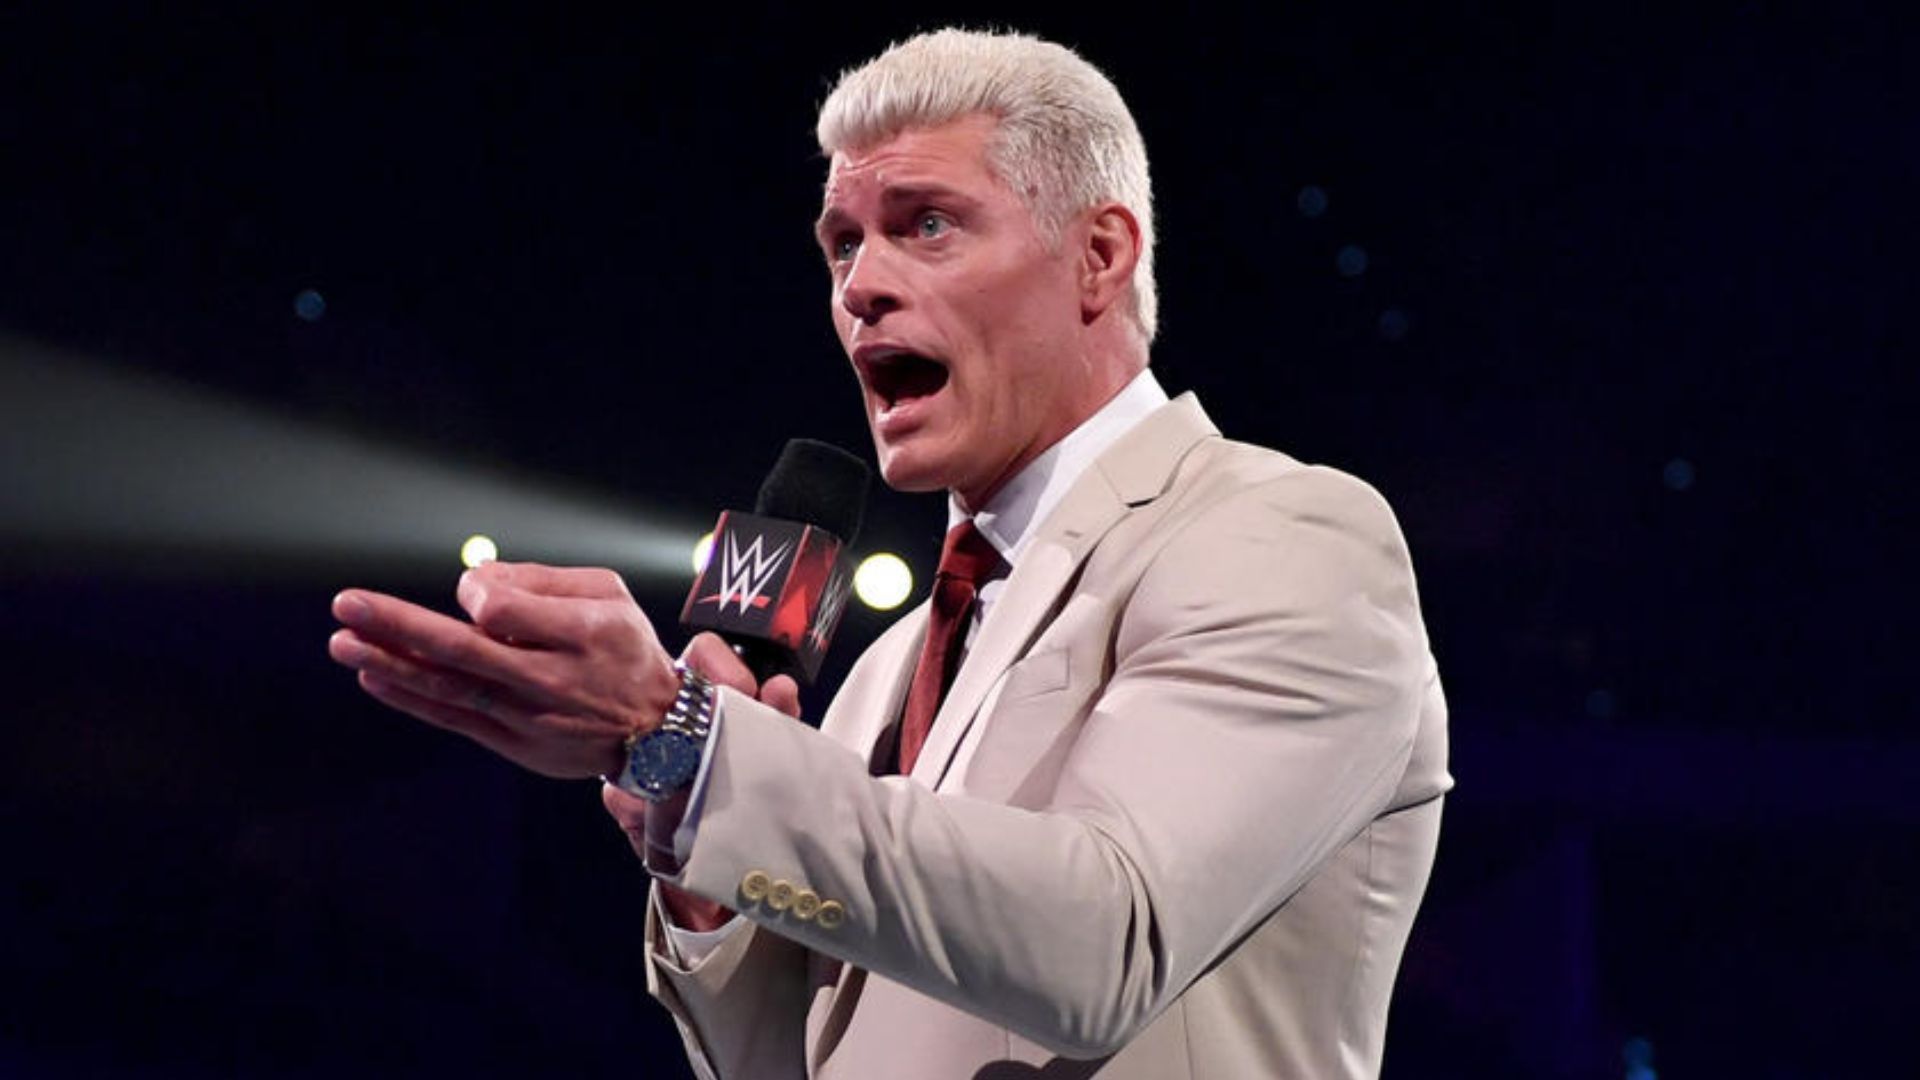 Cody Rhodes headlined WrestleMania one year after his WWE return